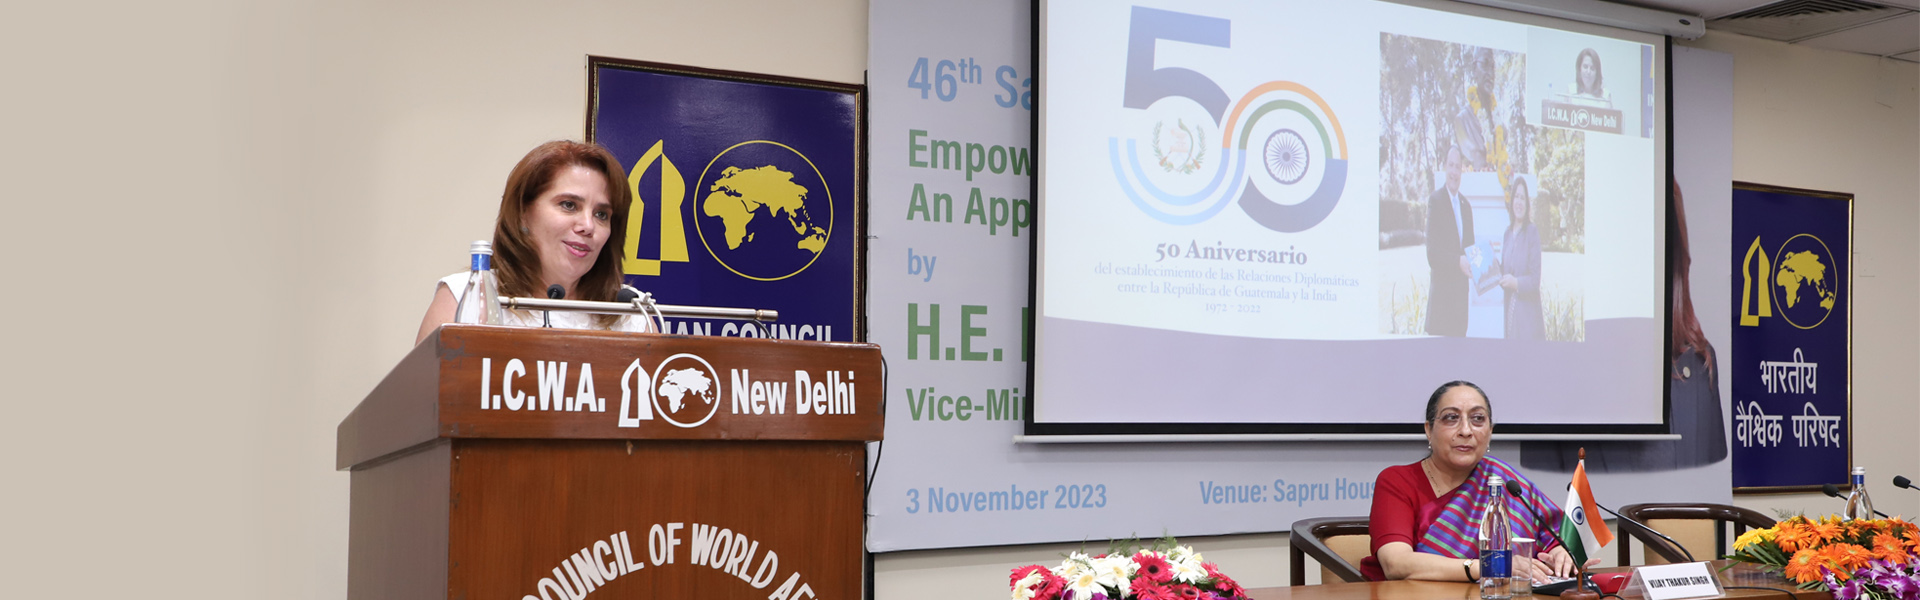 Her Excellency Ms. Karla Samayoa, Vice Minister for Foreign Affairs of The Republic of Guatemala delivering 46th Sapru House Lecture on ‘Empowerment of Women in Guatemala’ at Sapru House, 3 November 2023